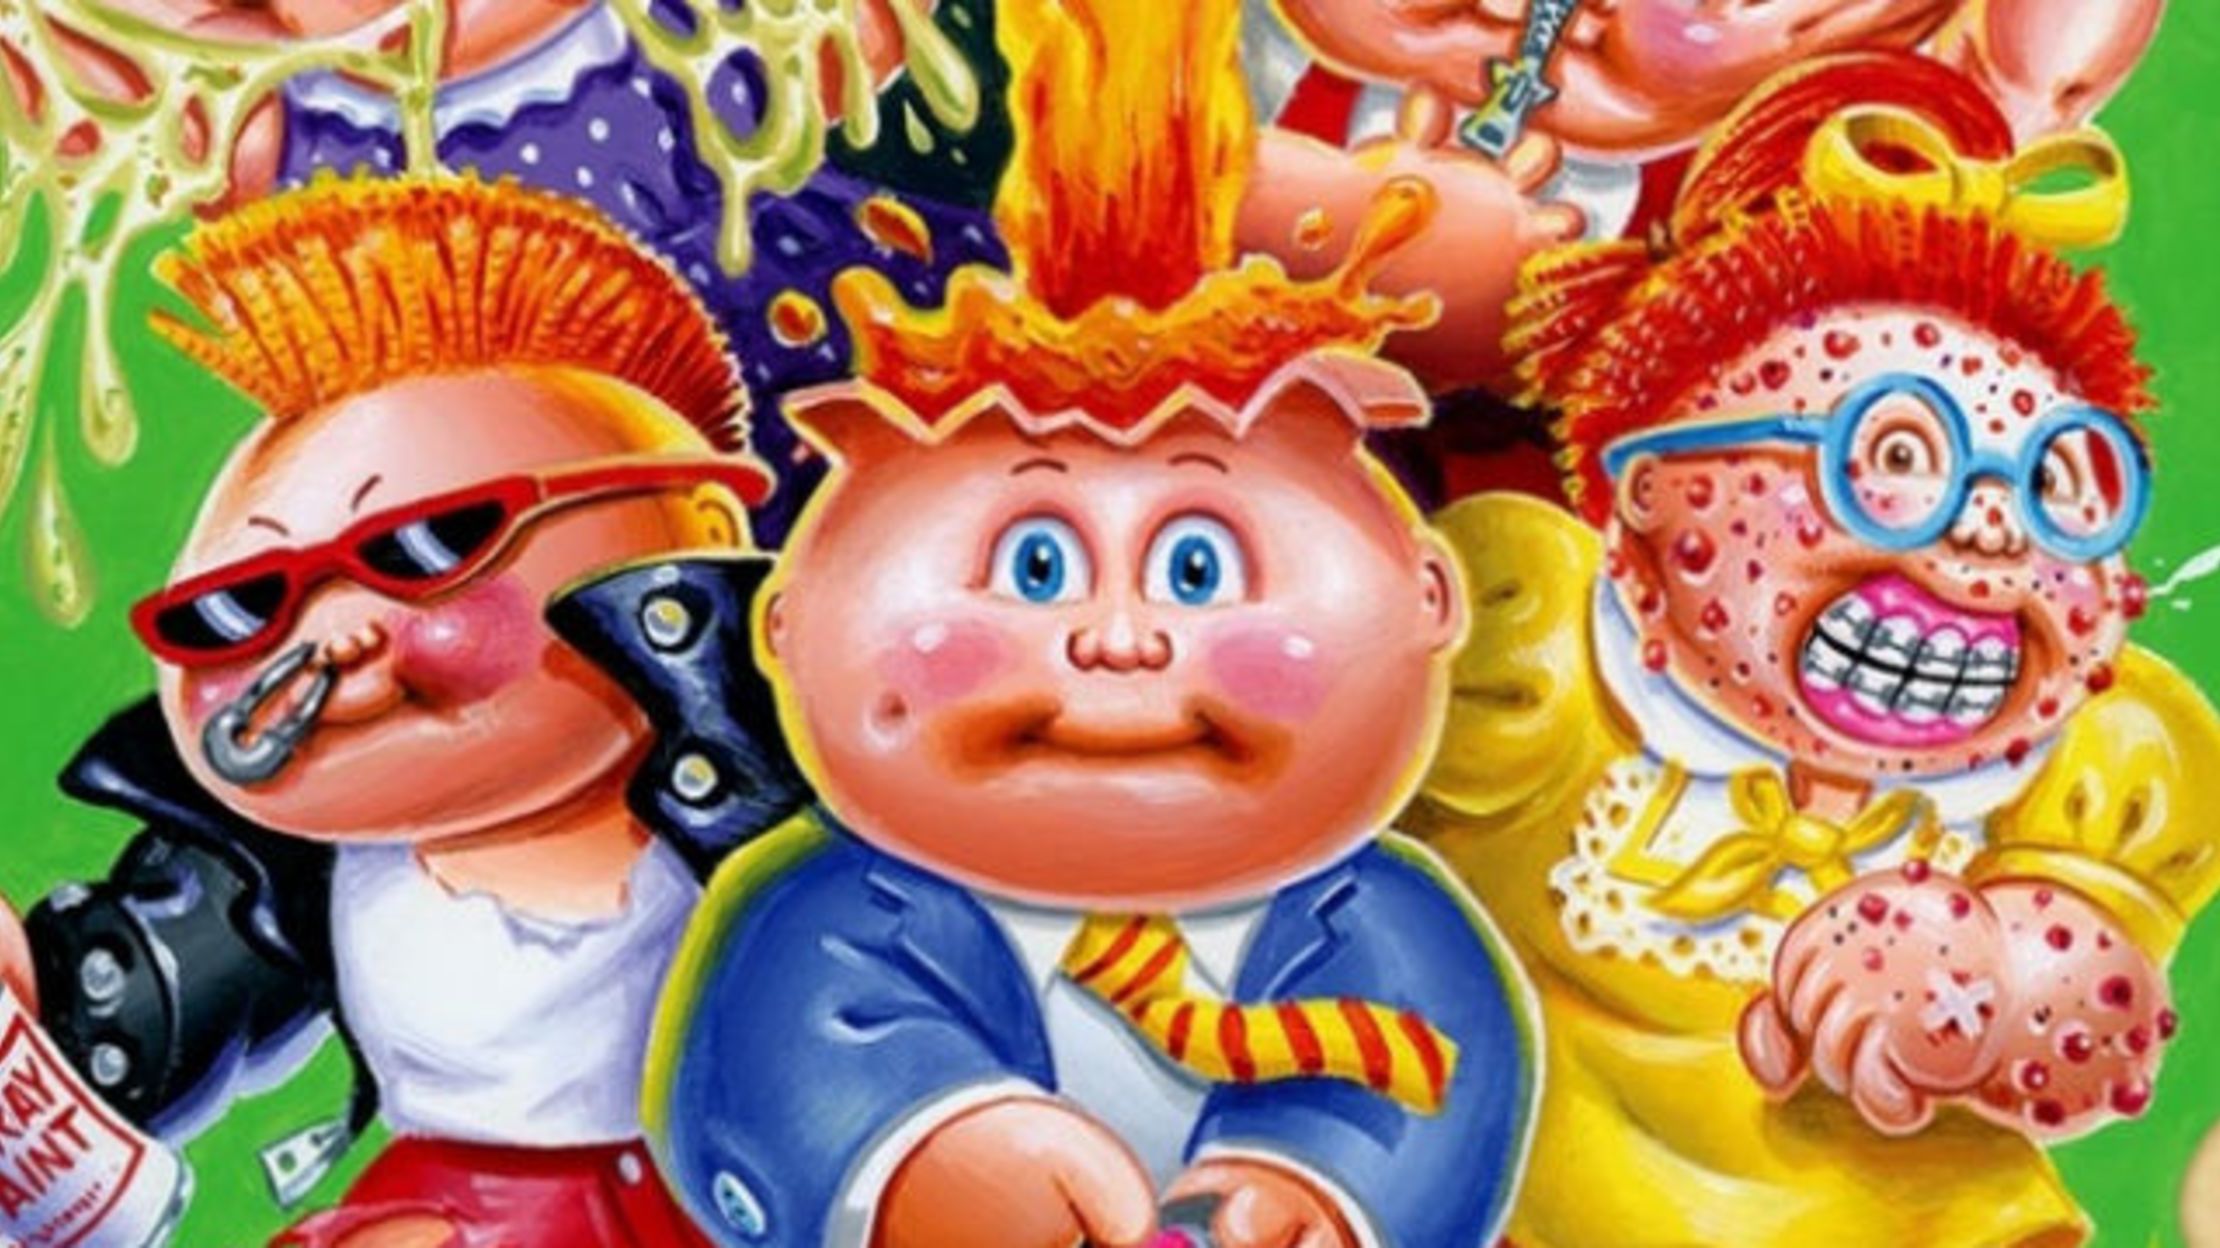 GPK 2019 SERIES 1 WE HATE THE /'90S PICK 10 FOR $1.50 FROM THE LIST